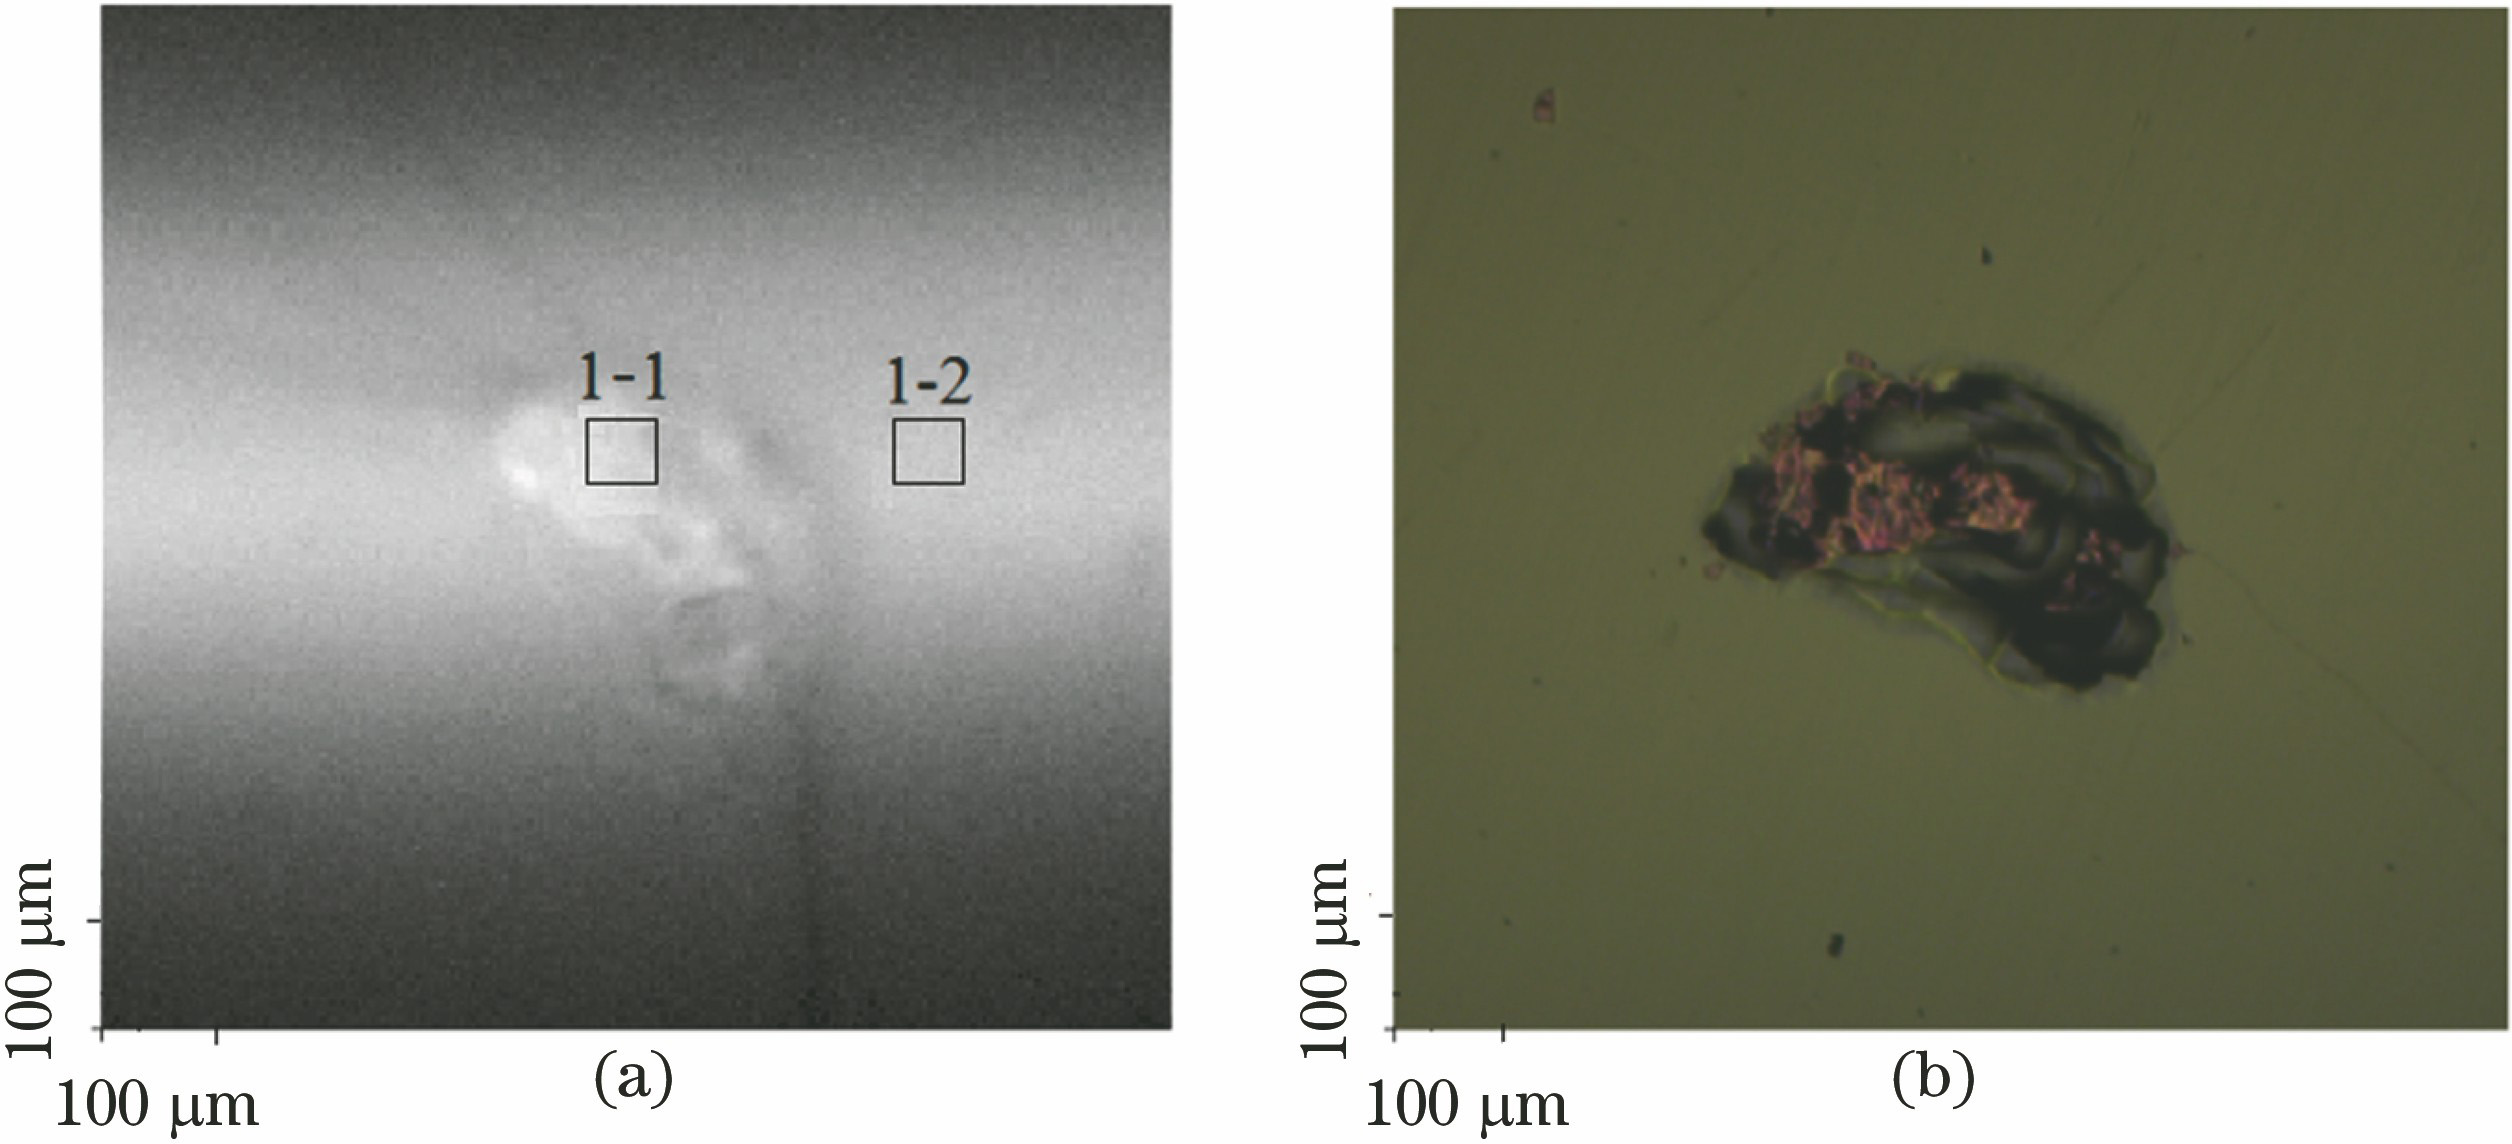 Surface SXI and optical microscope images for sample 1. (a) SXI image; (b) optical microscope image